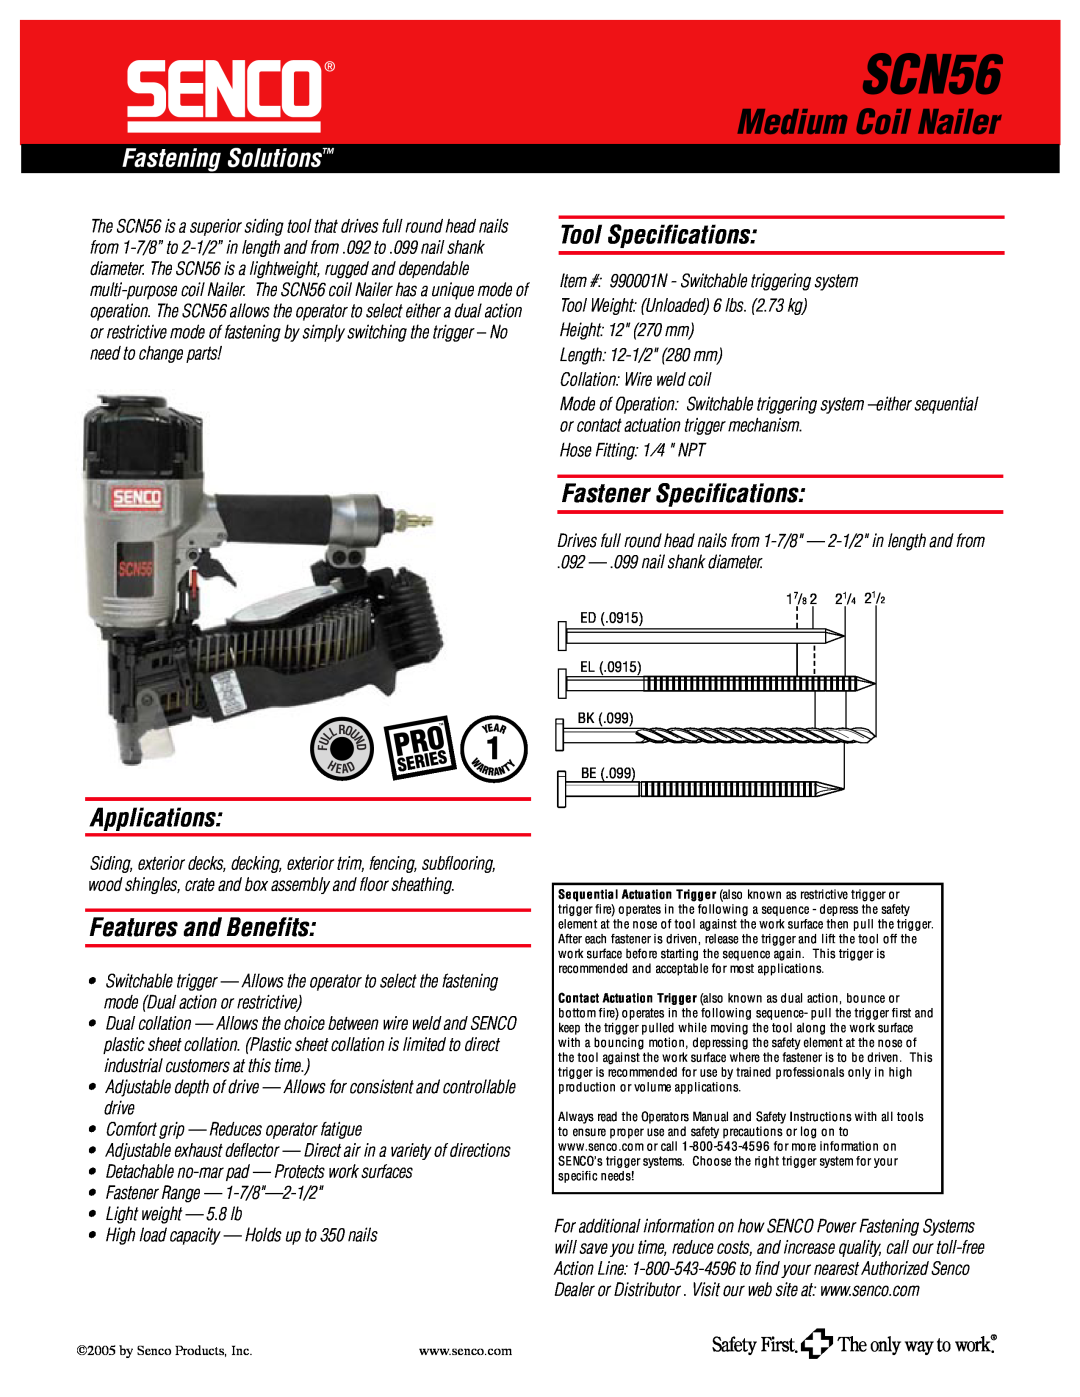 Senco SCN56 specifications Medium Coil Nailer, Fastening Solutions, Applications, Features and Benefits 